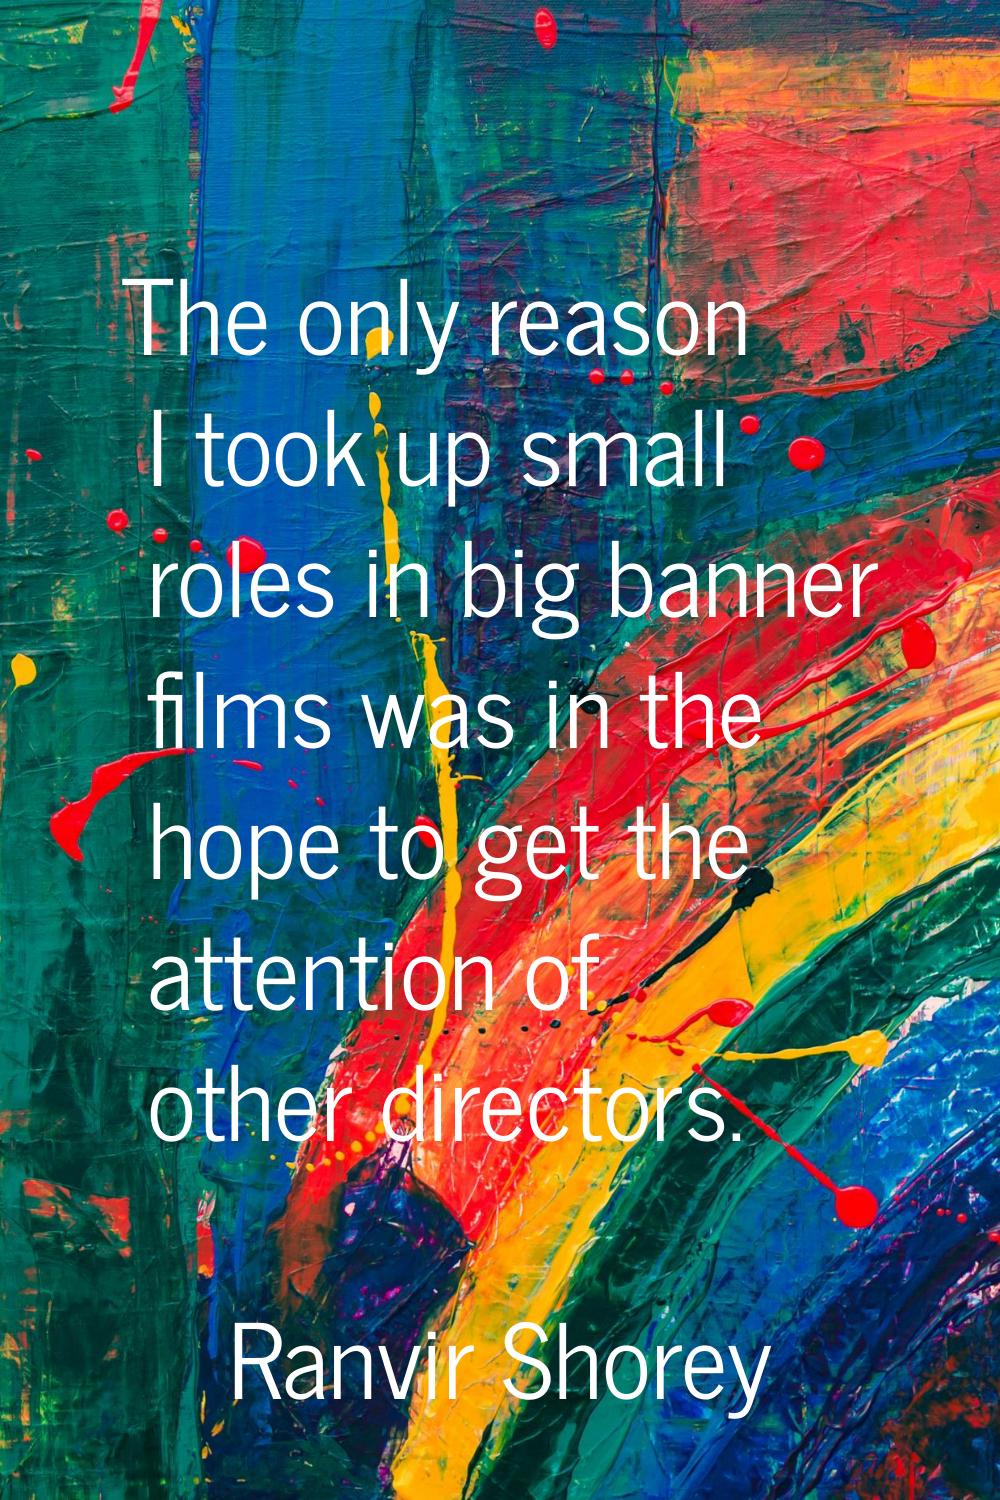 The only reason I took up small roles in big banner films was in the hope to get the attention of o